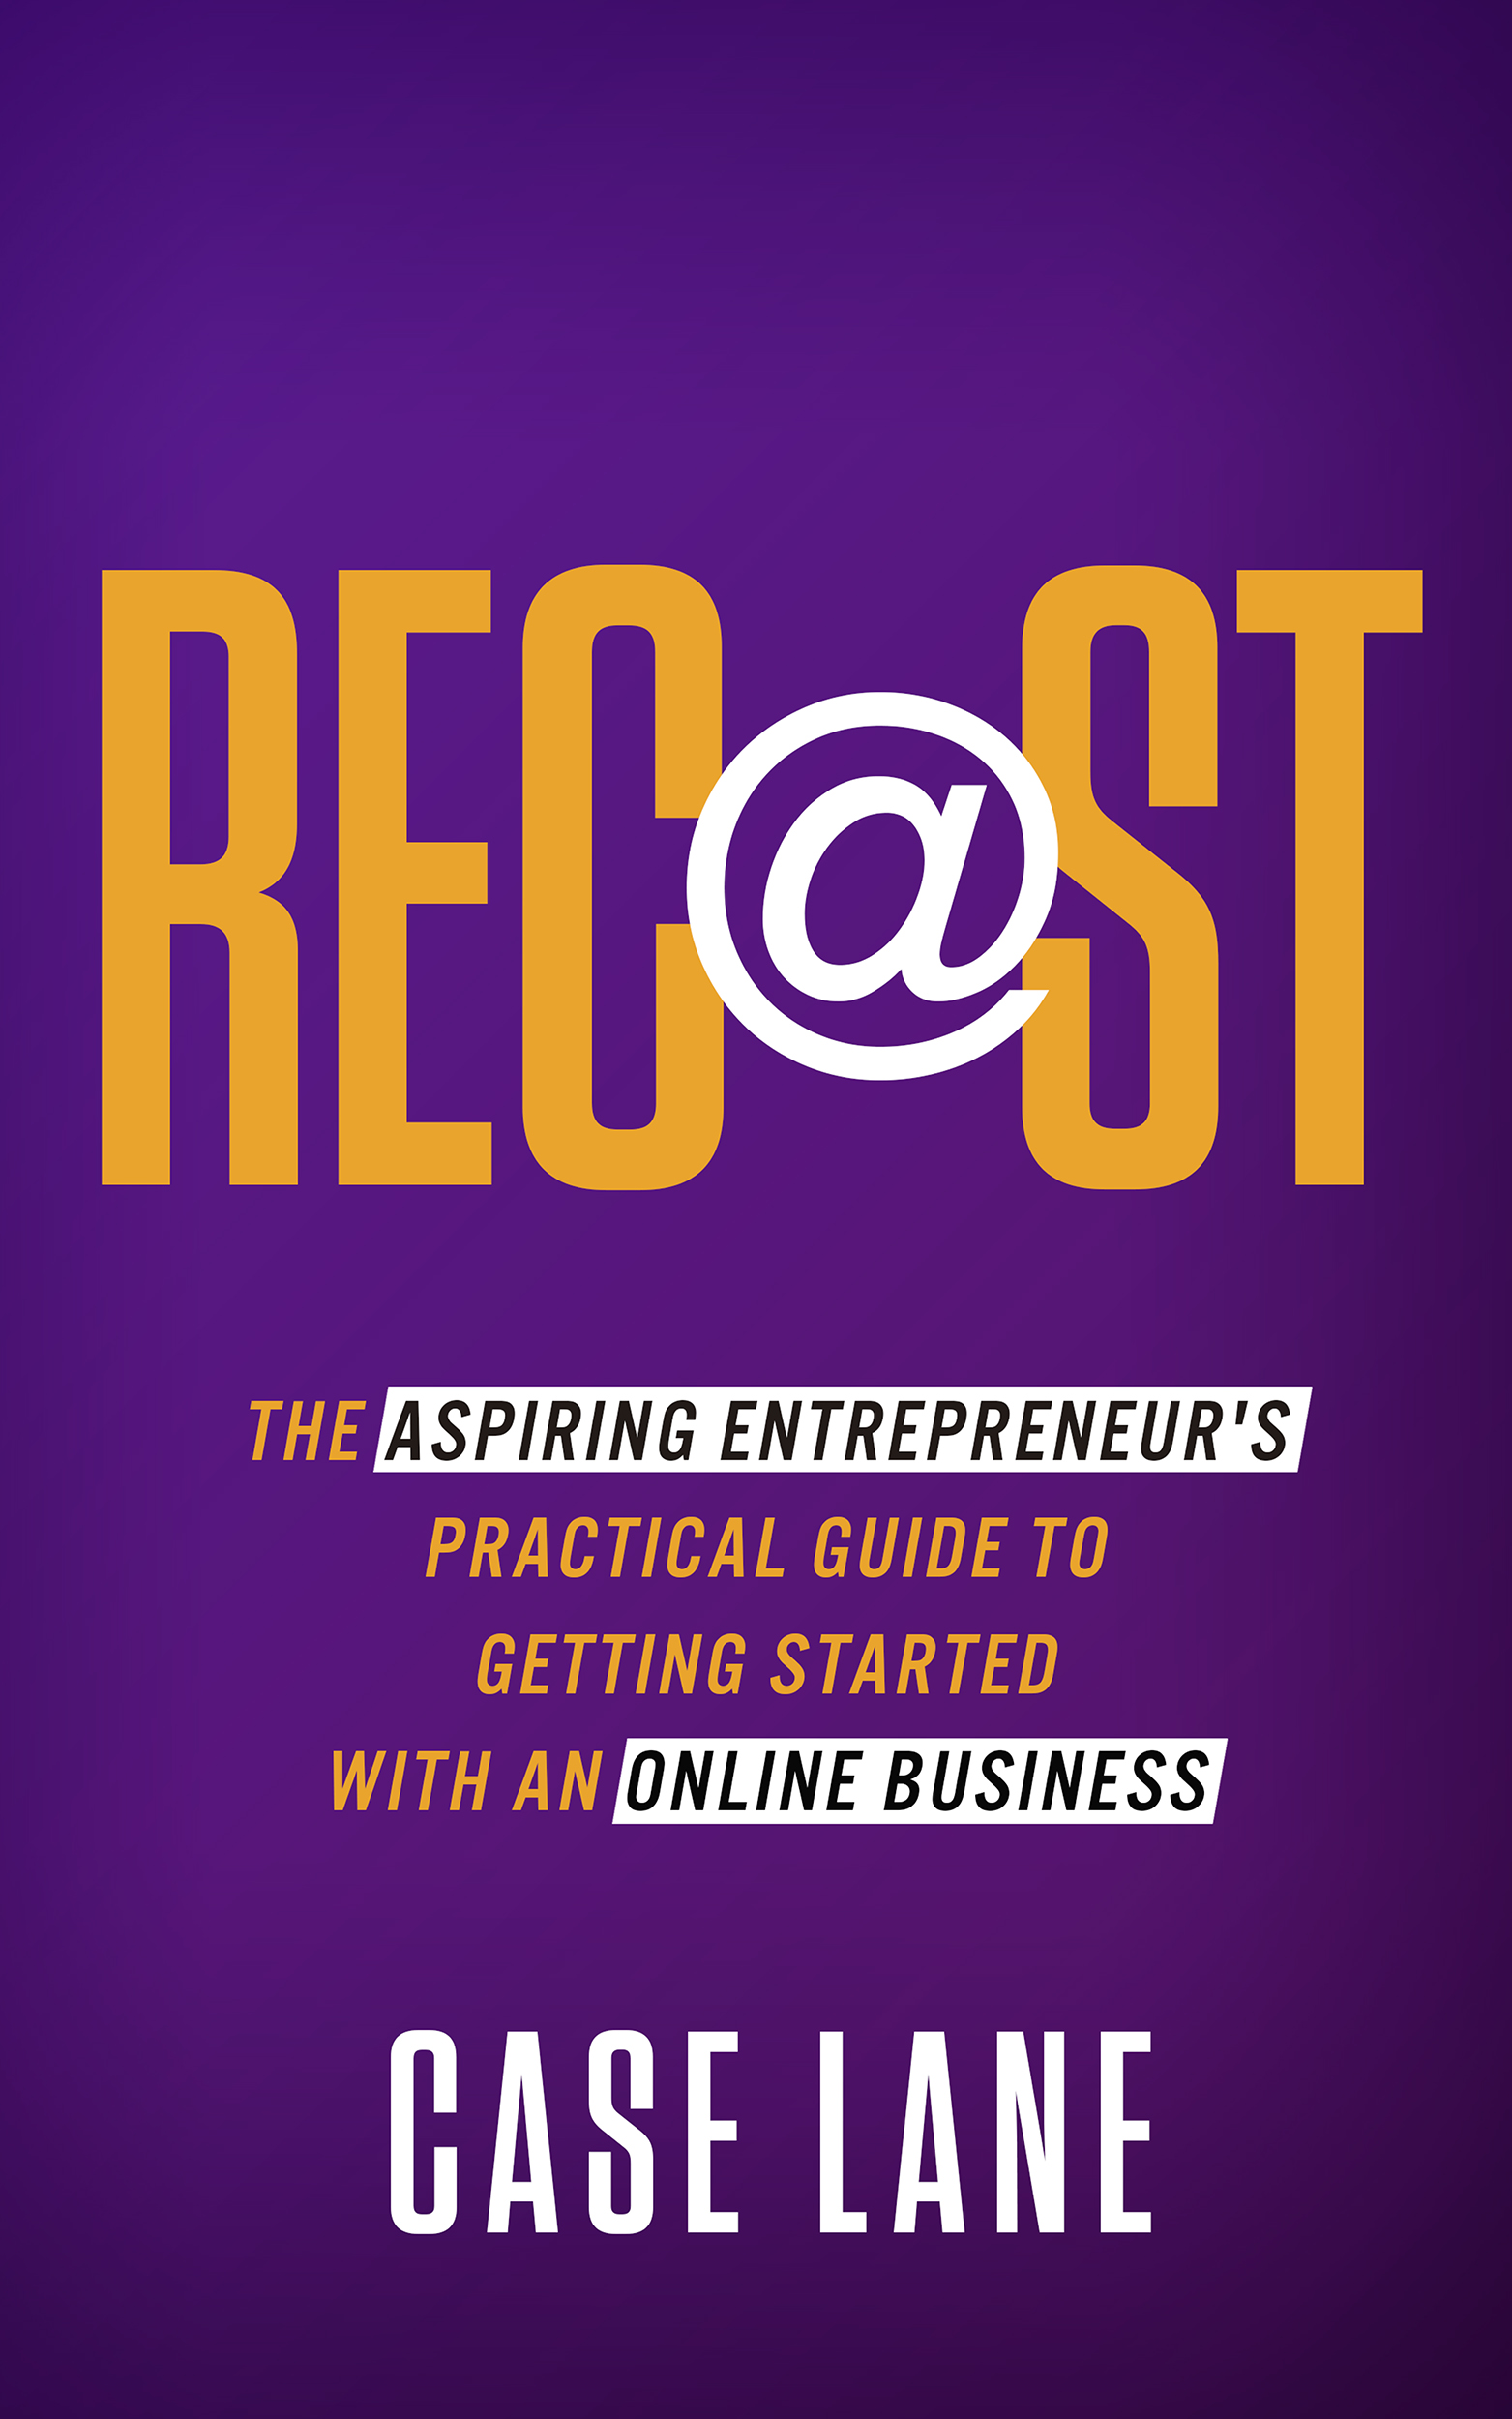 Download Recast: The Aspiring Entrepreneur’s Practical Guide to Getting Started with an Online Business